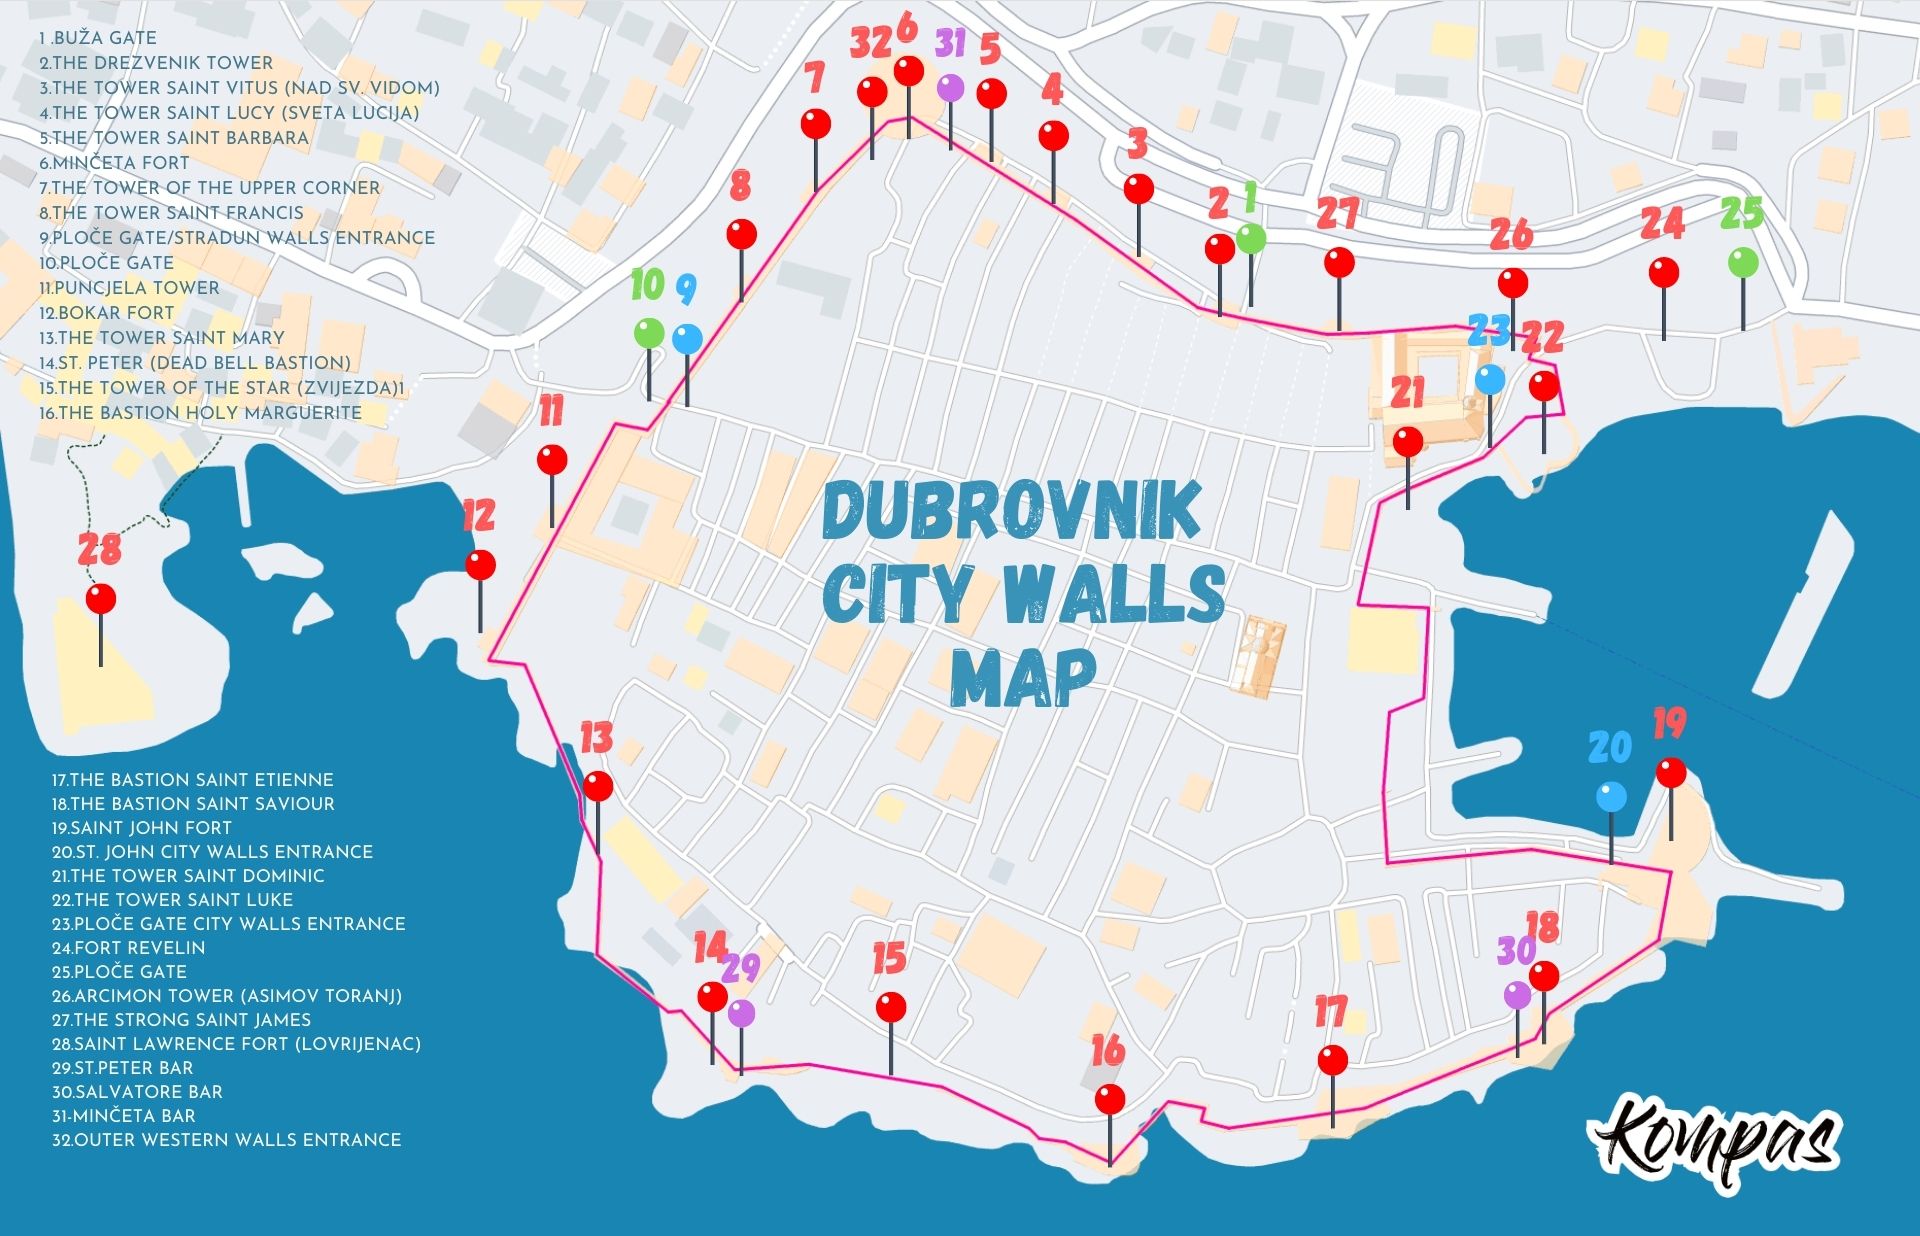 Dubrovnik Walls Map with names of all places of interest like towers, forts, entrances and bars.